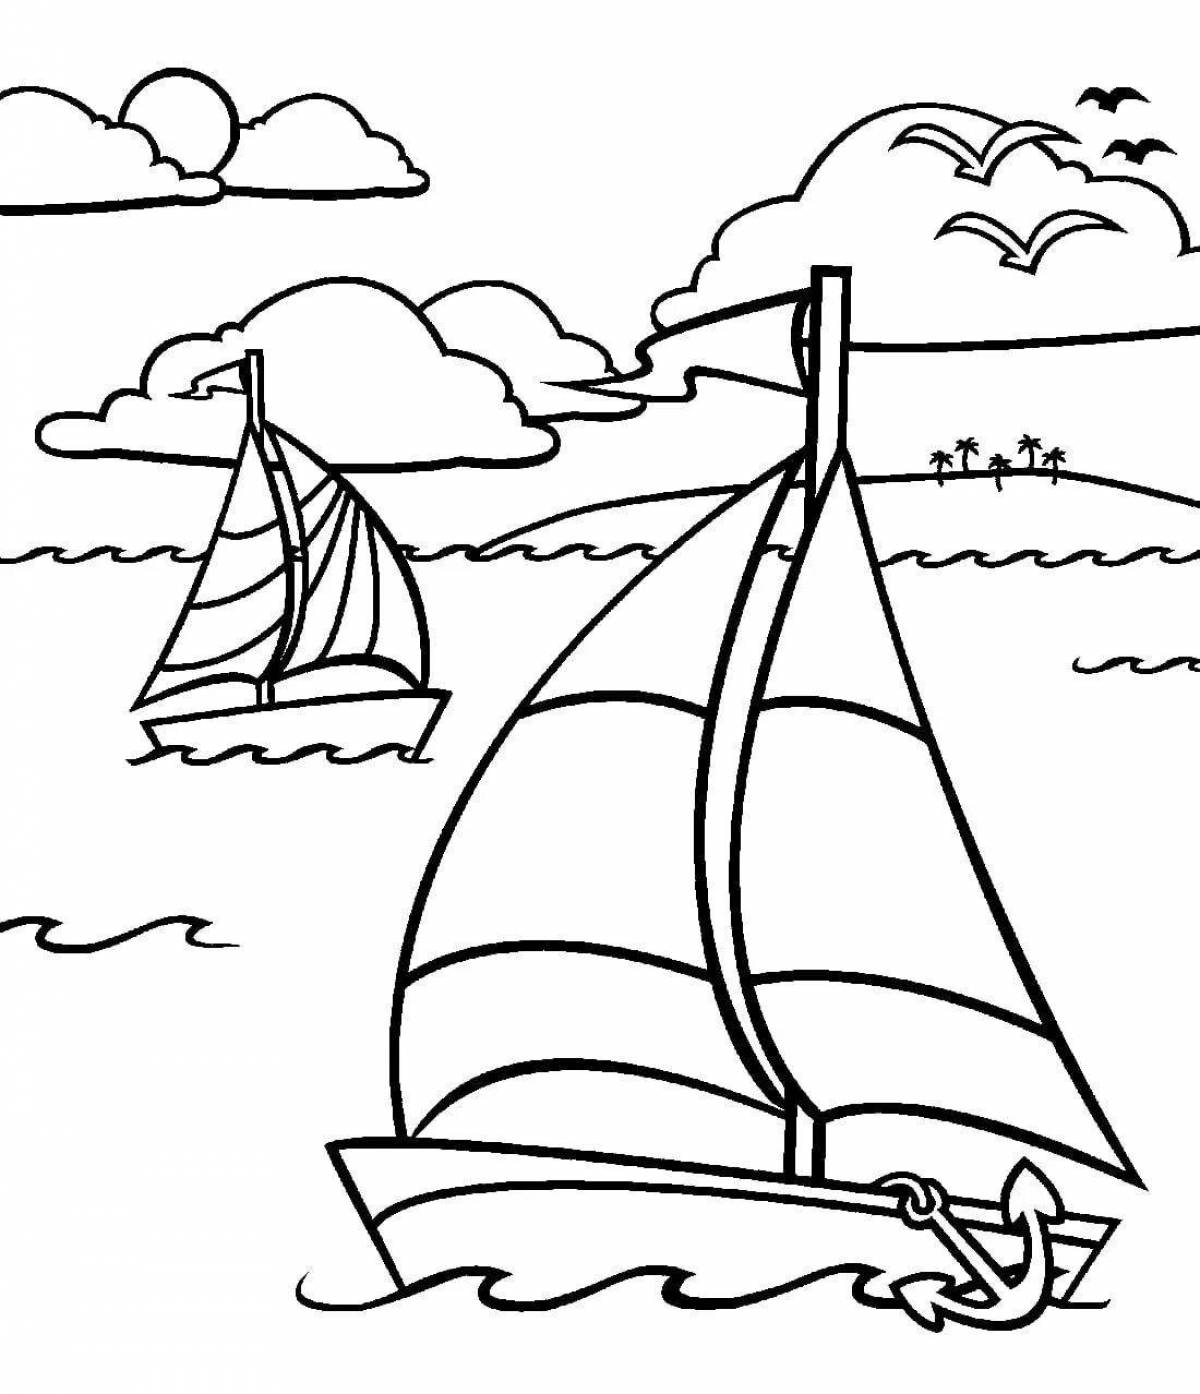 Glorious sea coloring for kids